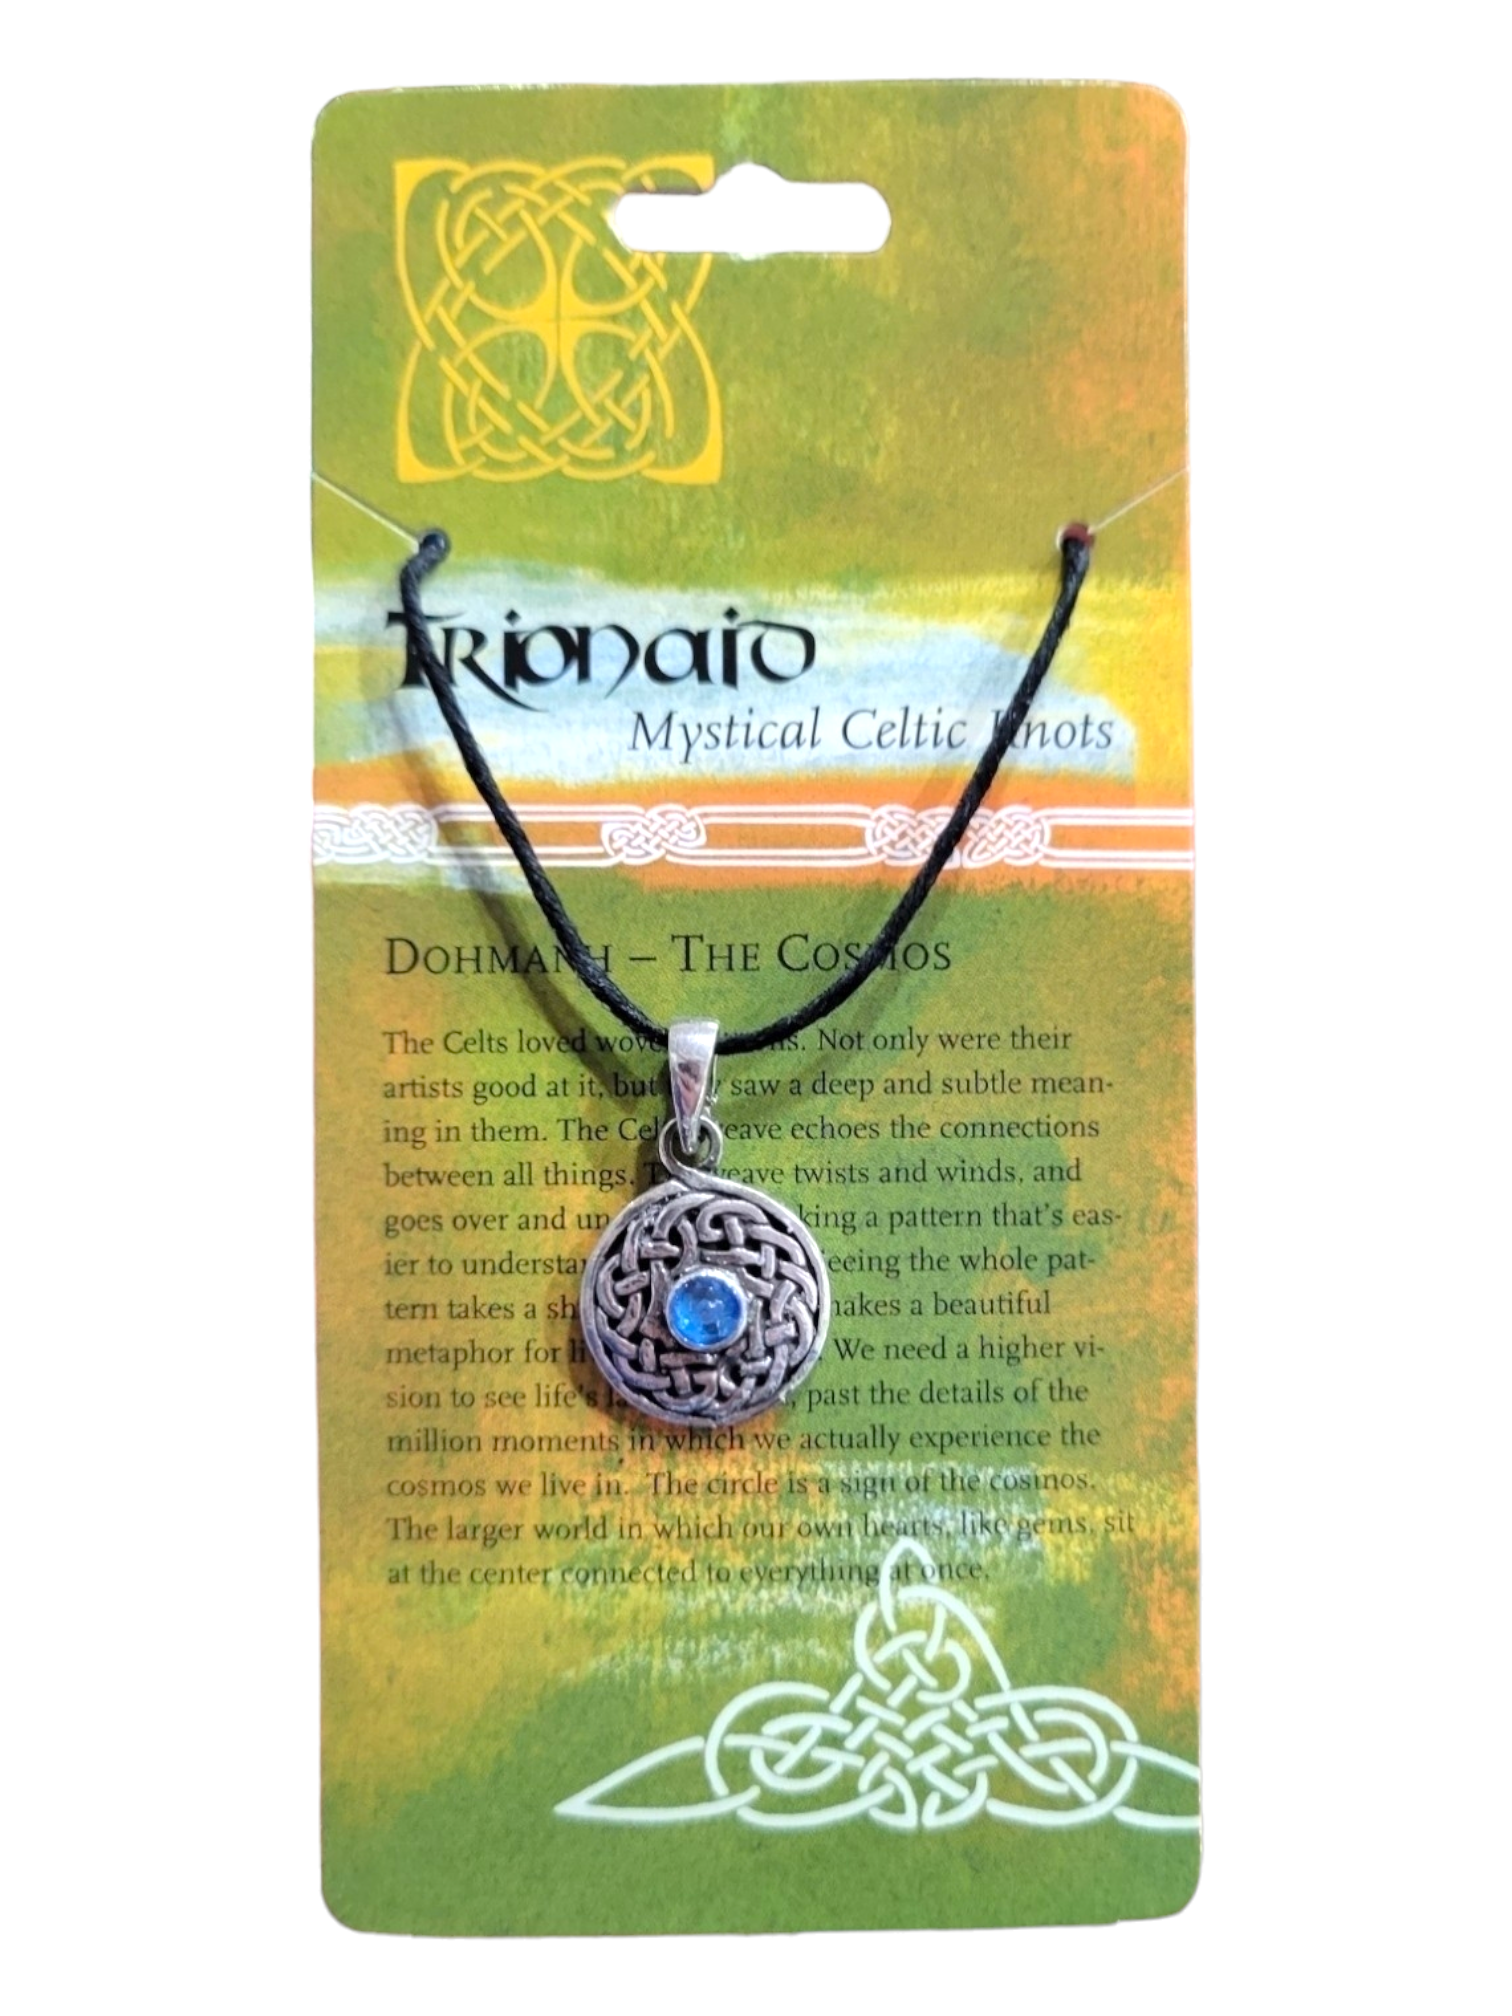 Jewelry: Trionaid Mystical Celtic Knots-Dohmanh The Cosmos